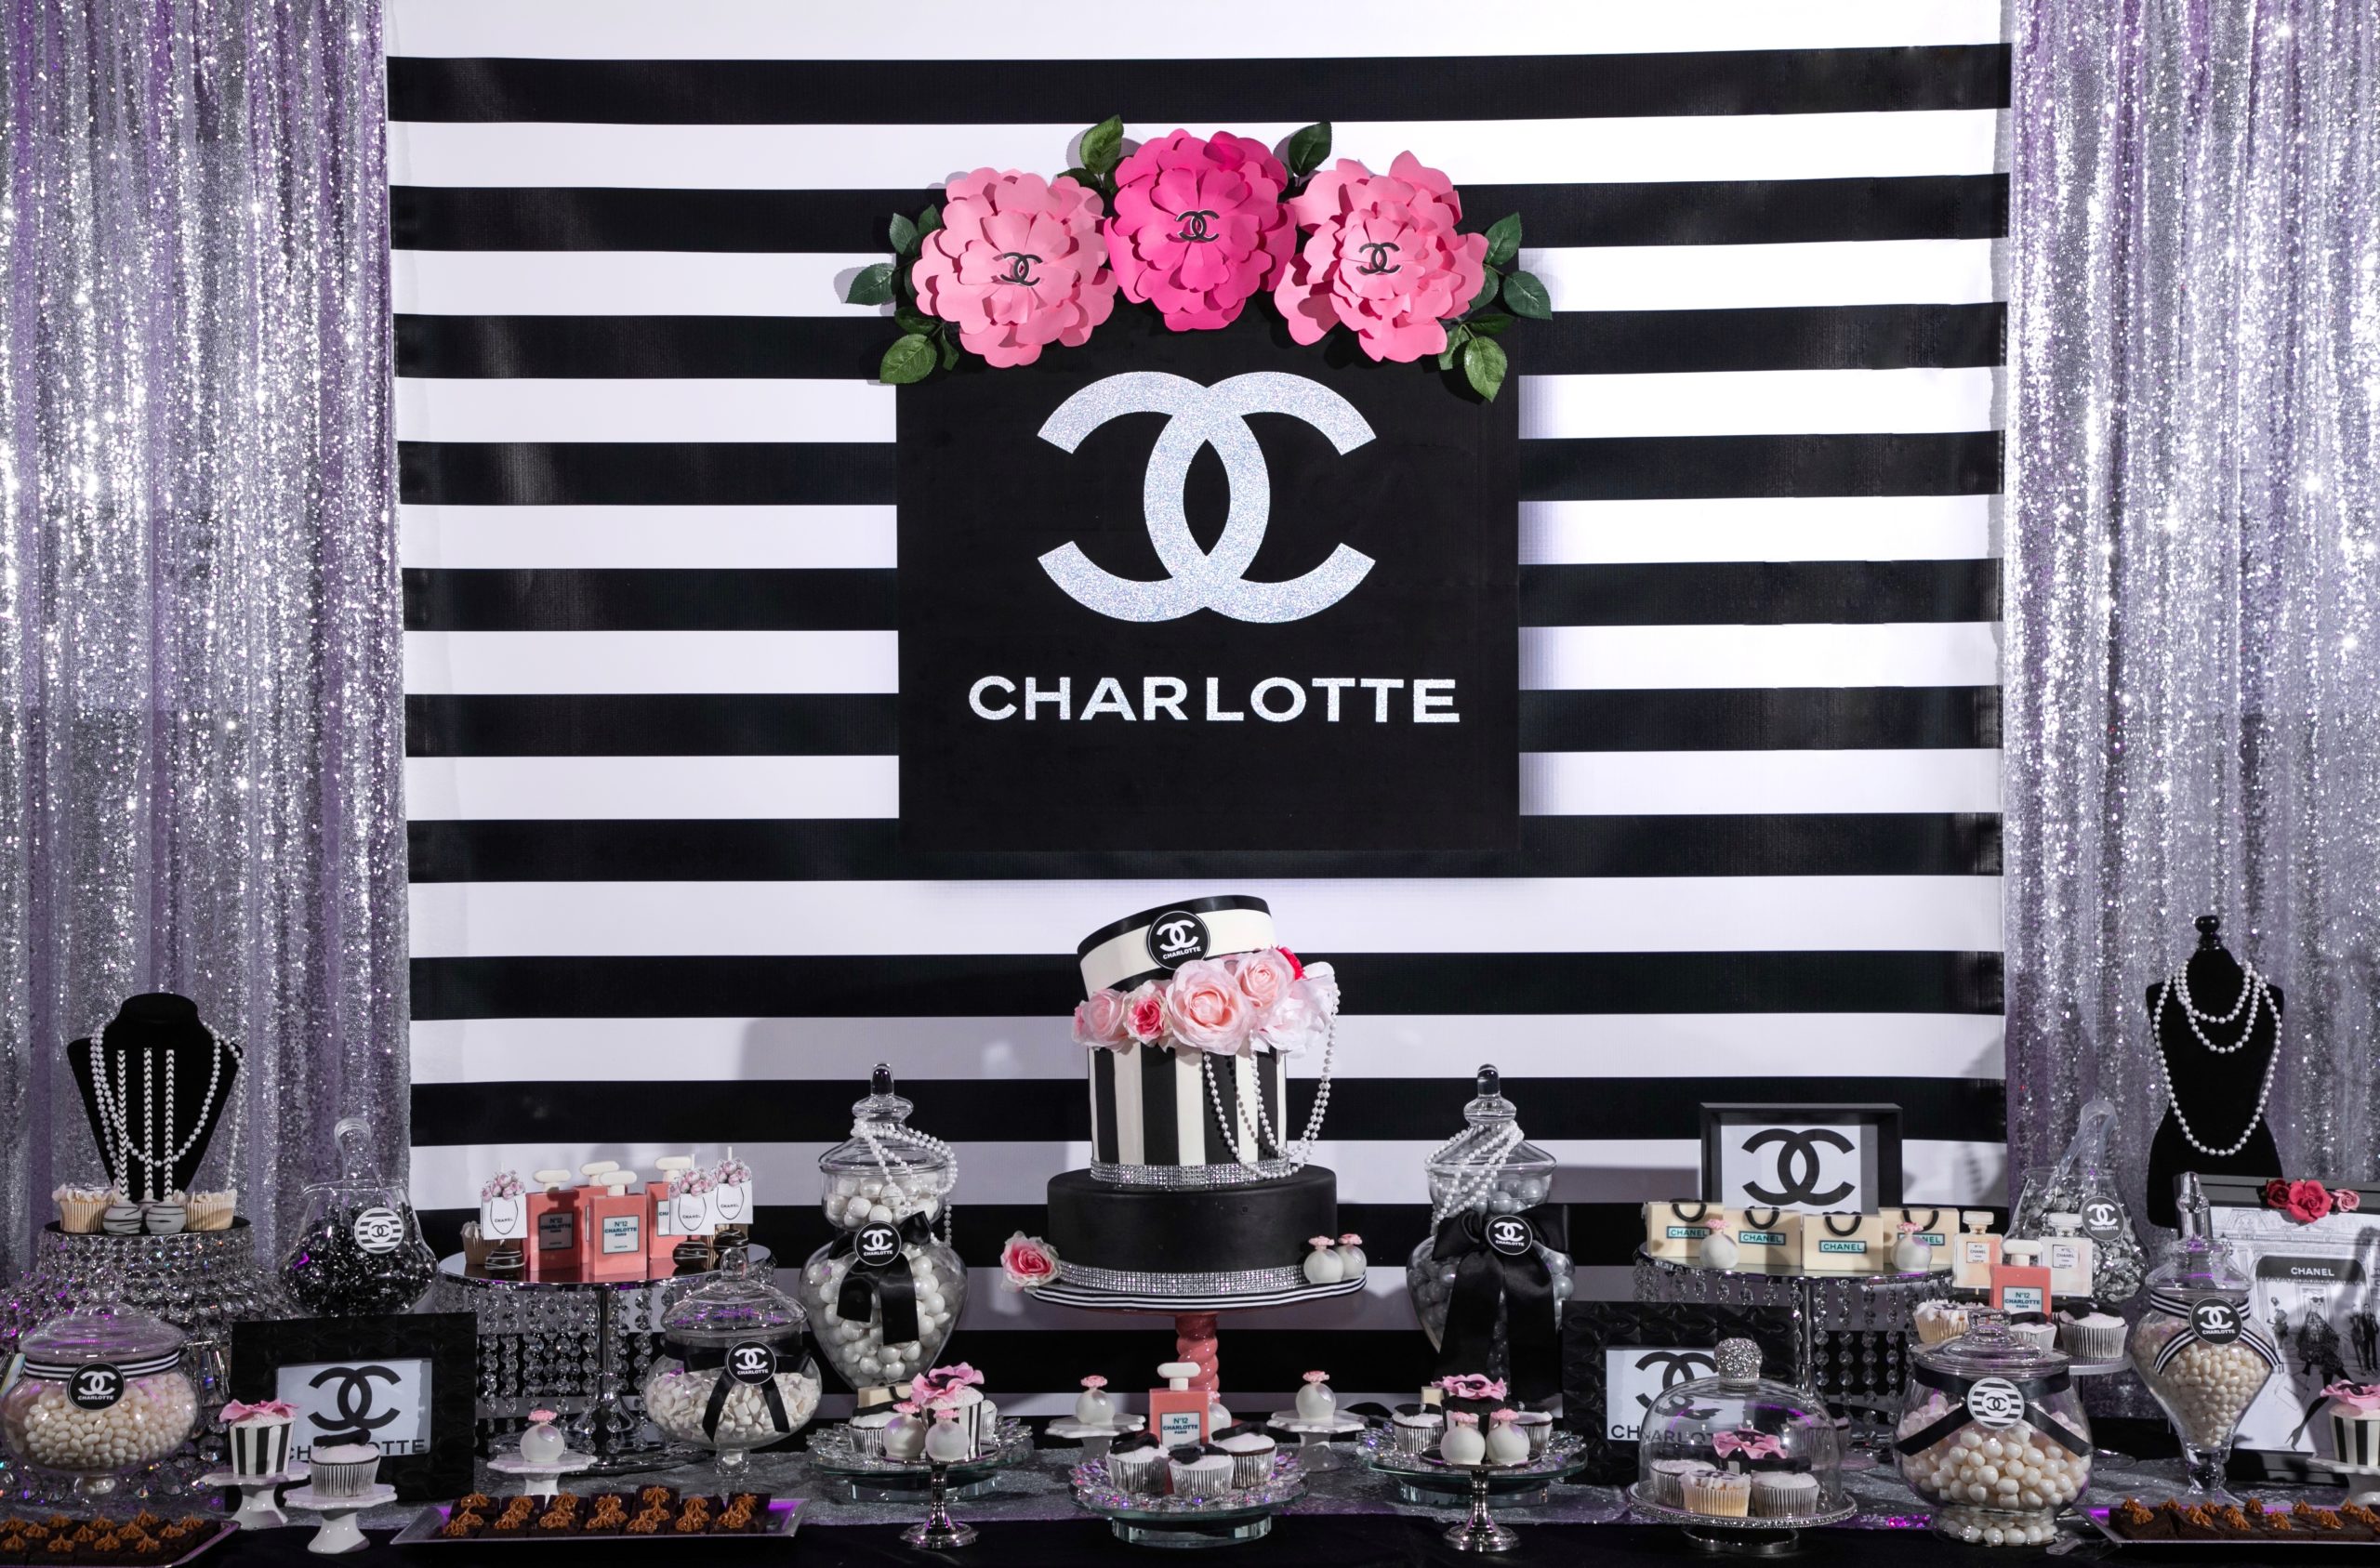 Chanel Inspired party - A Happy Blog